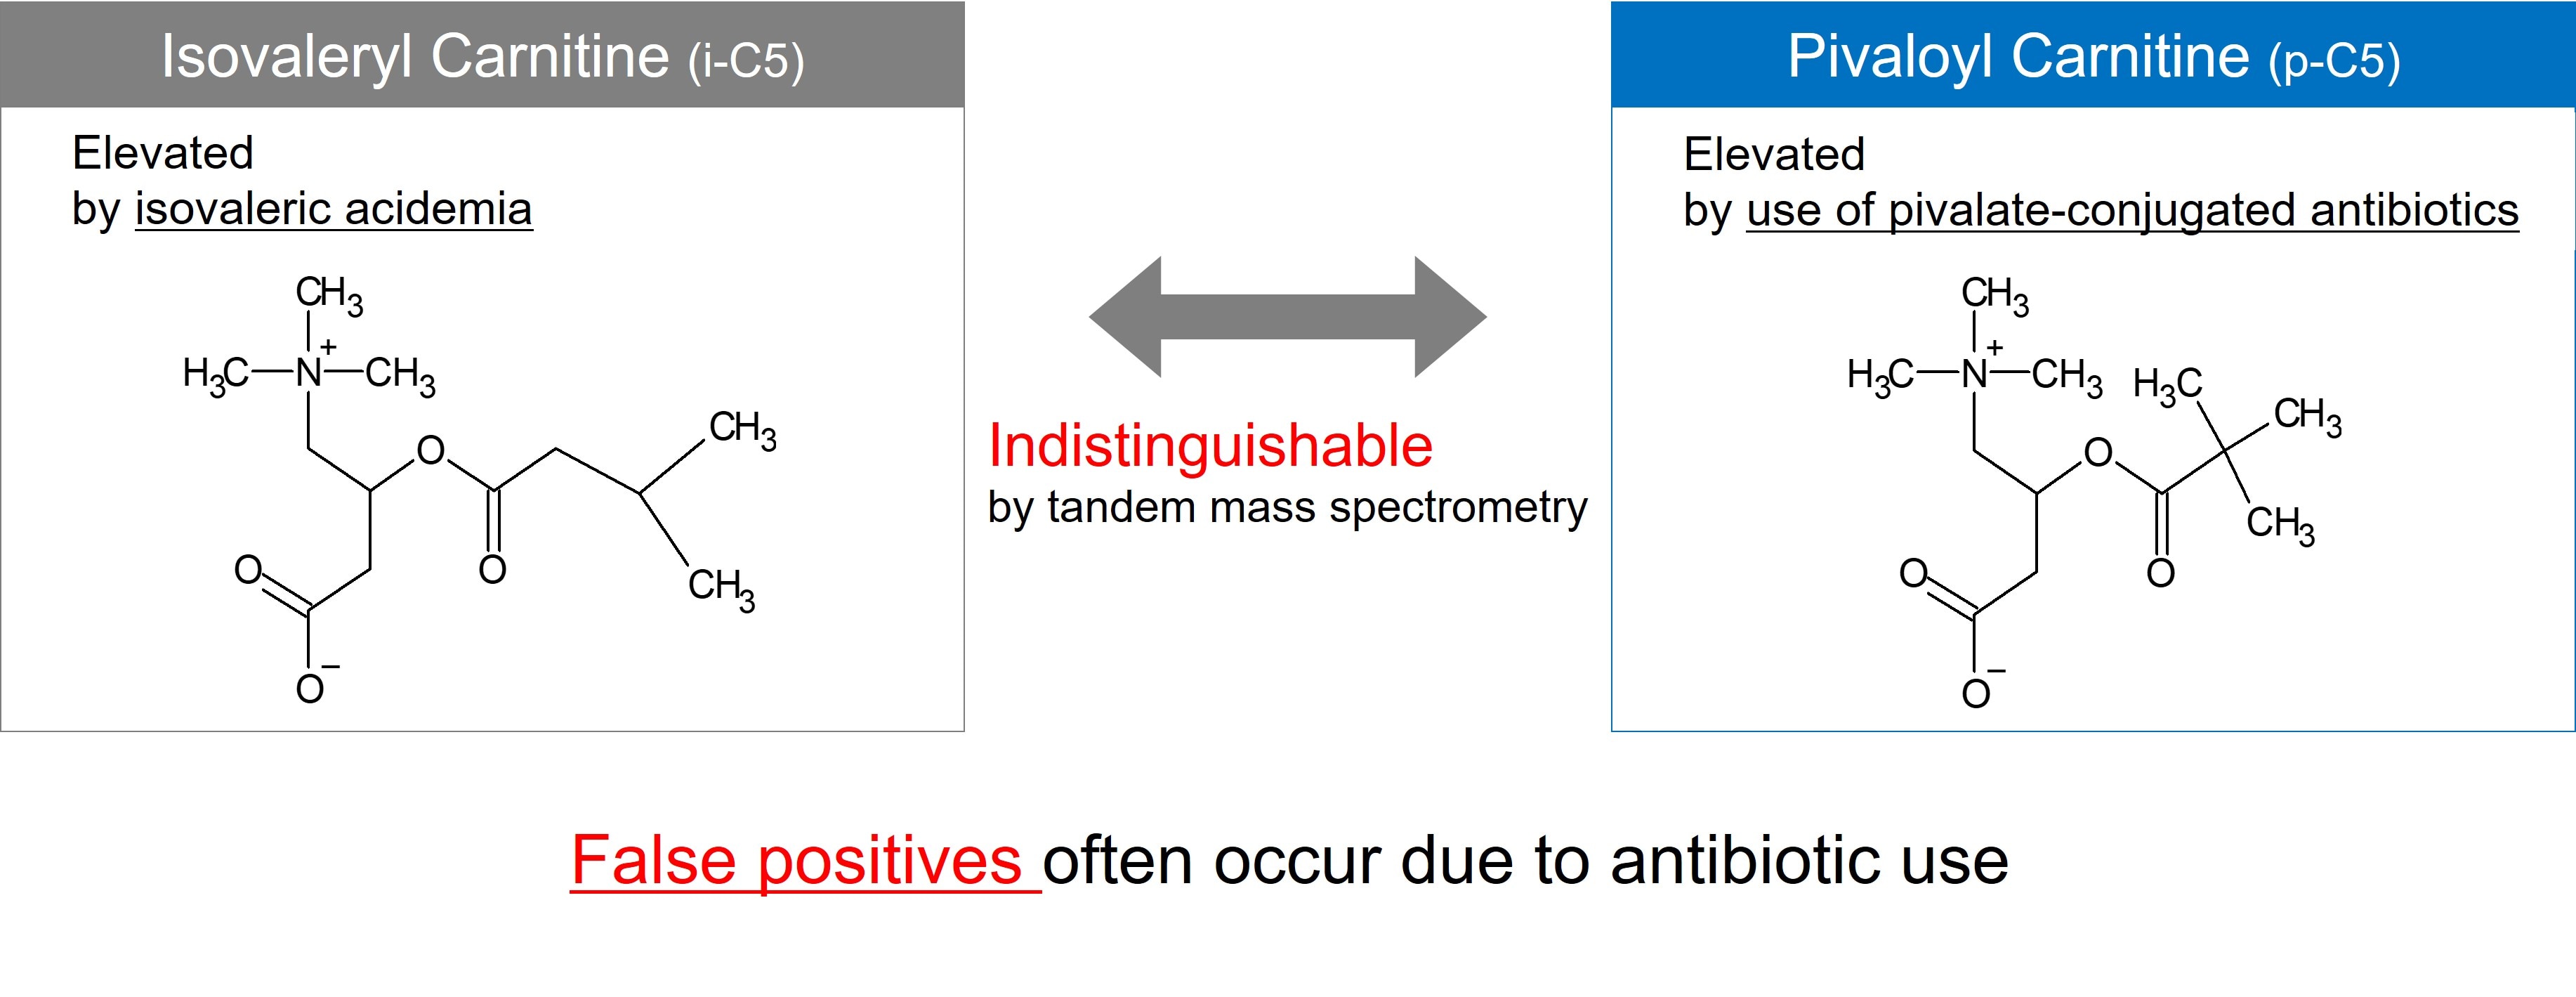 False positives often occur due to antibiotic use